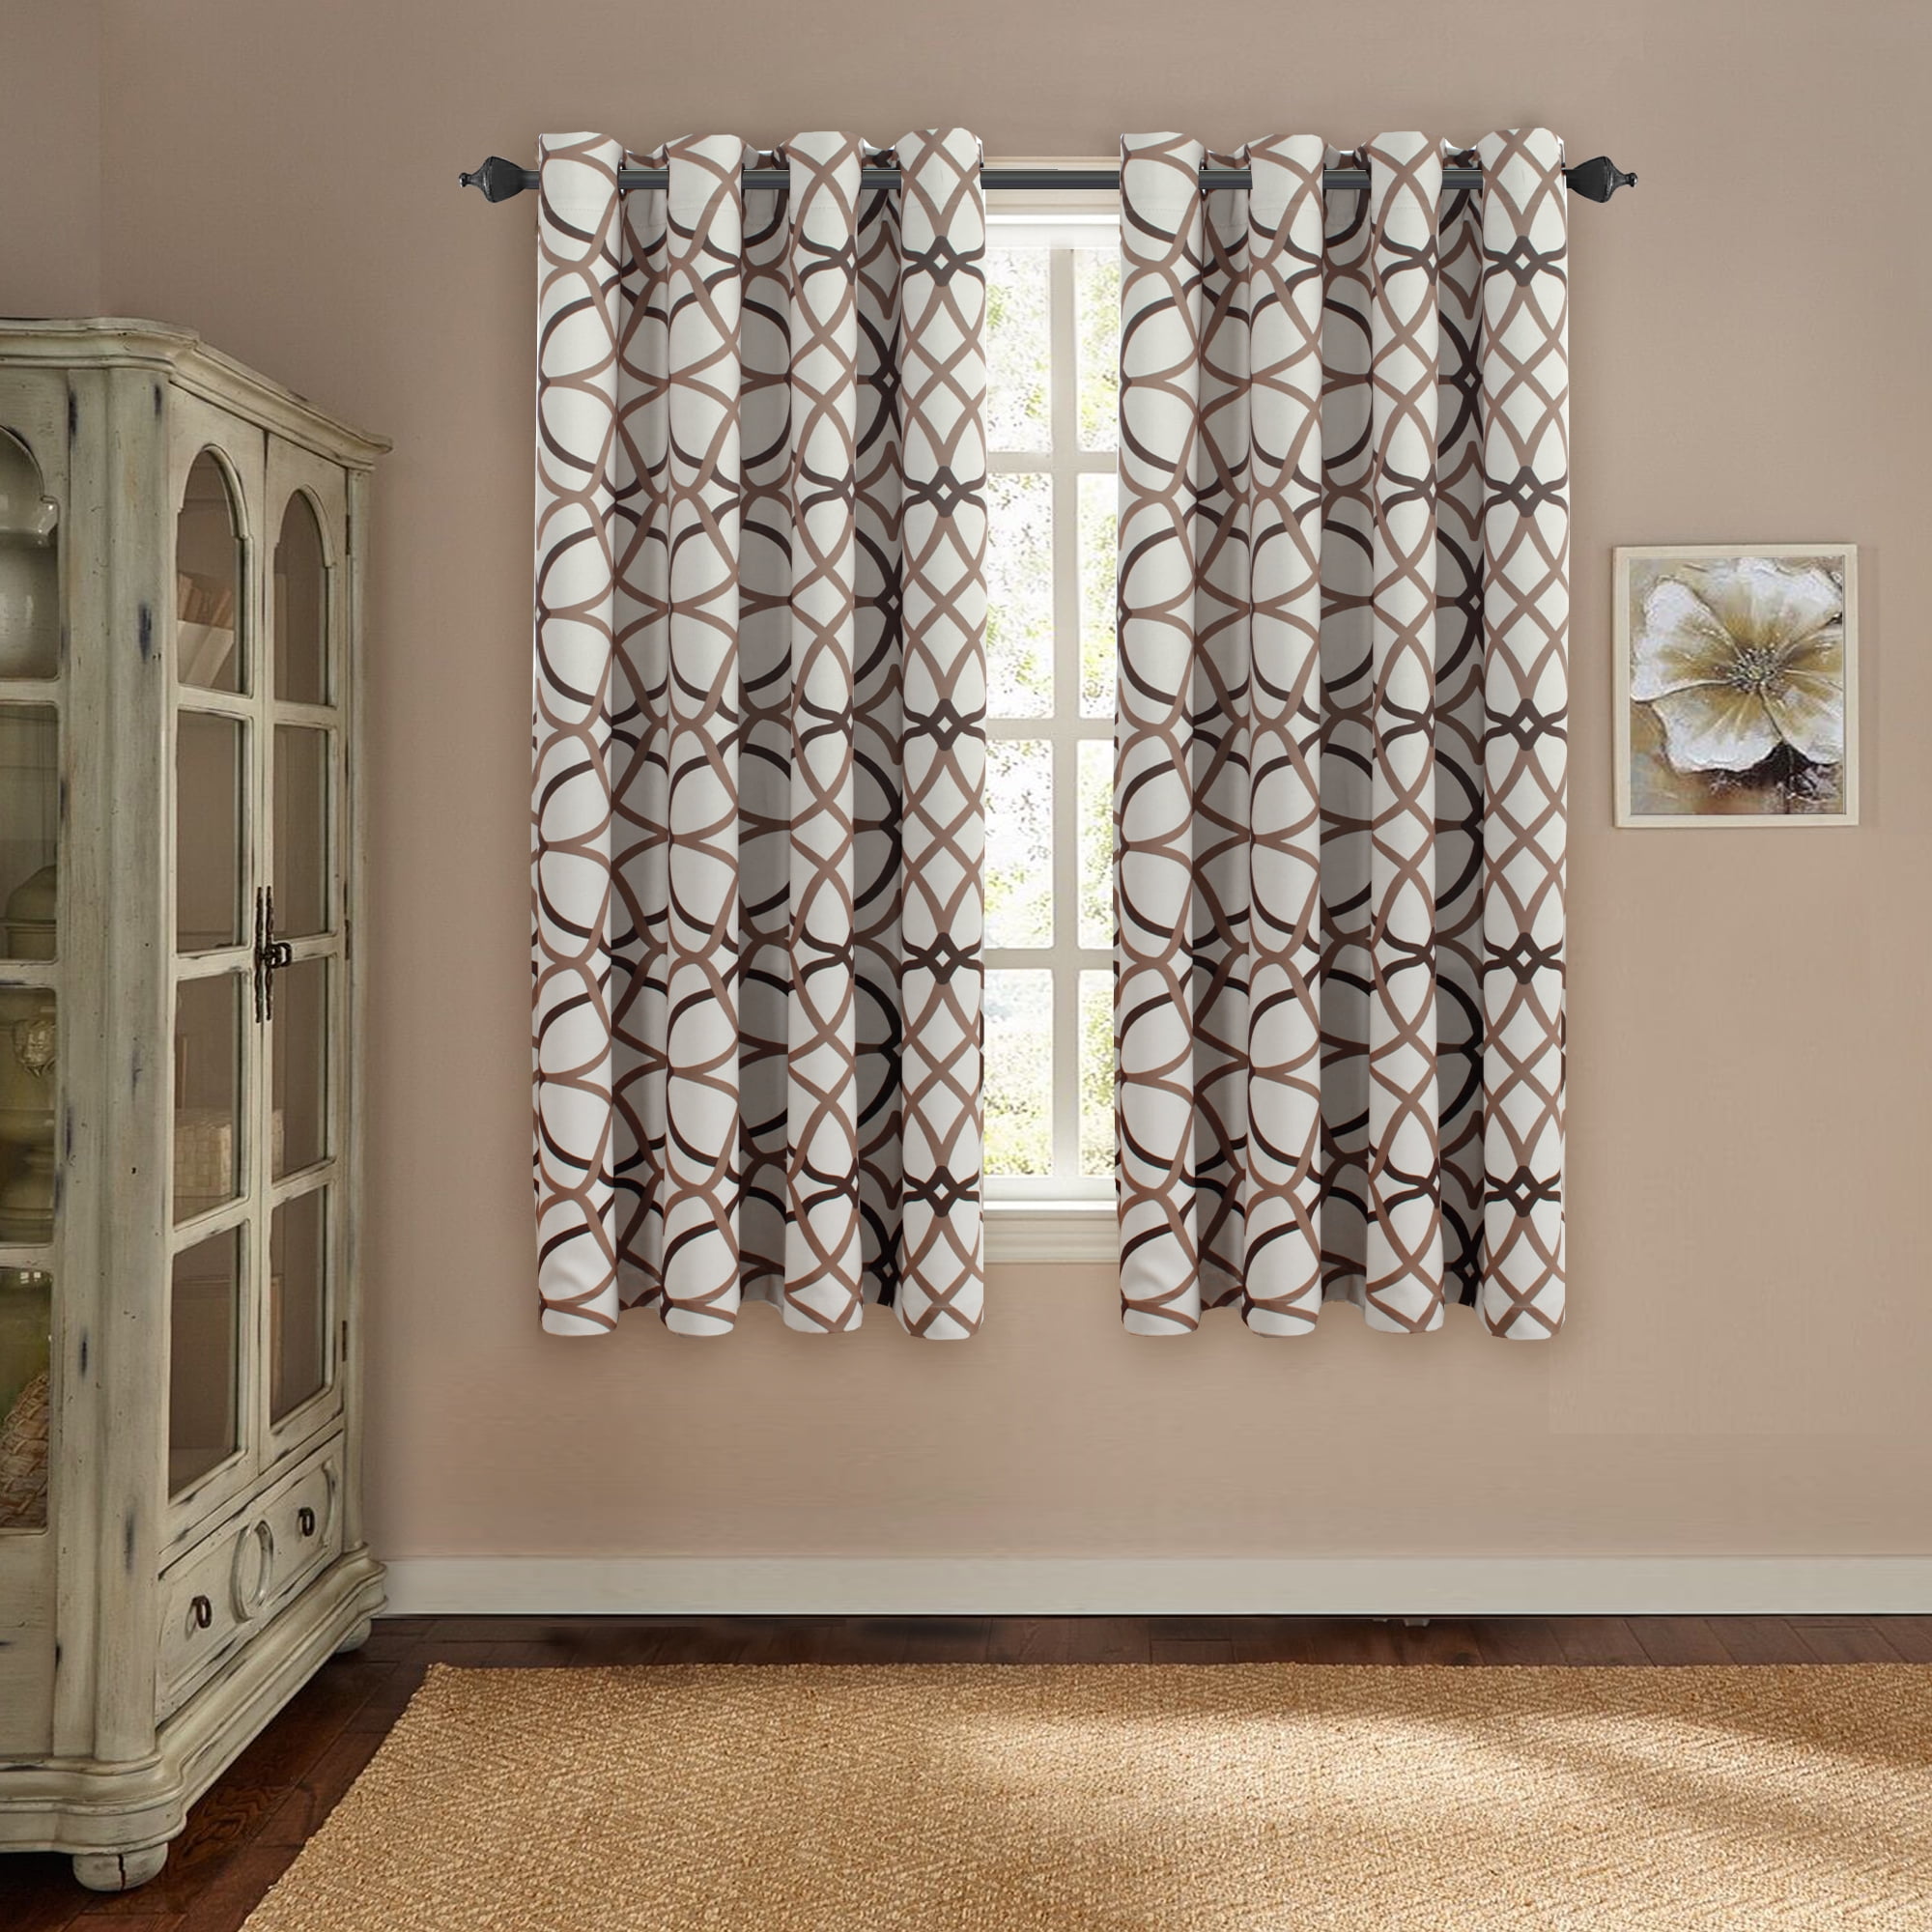 Thermal Insulated Blackout Grommet Top Window Curtain Panel 52"W x 63"L Taupe 